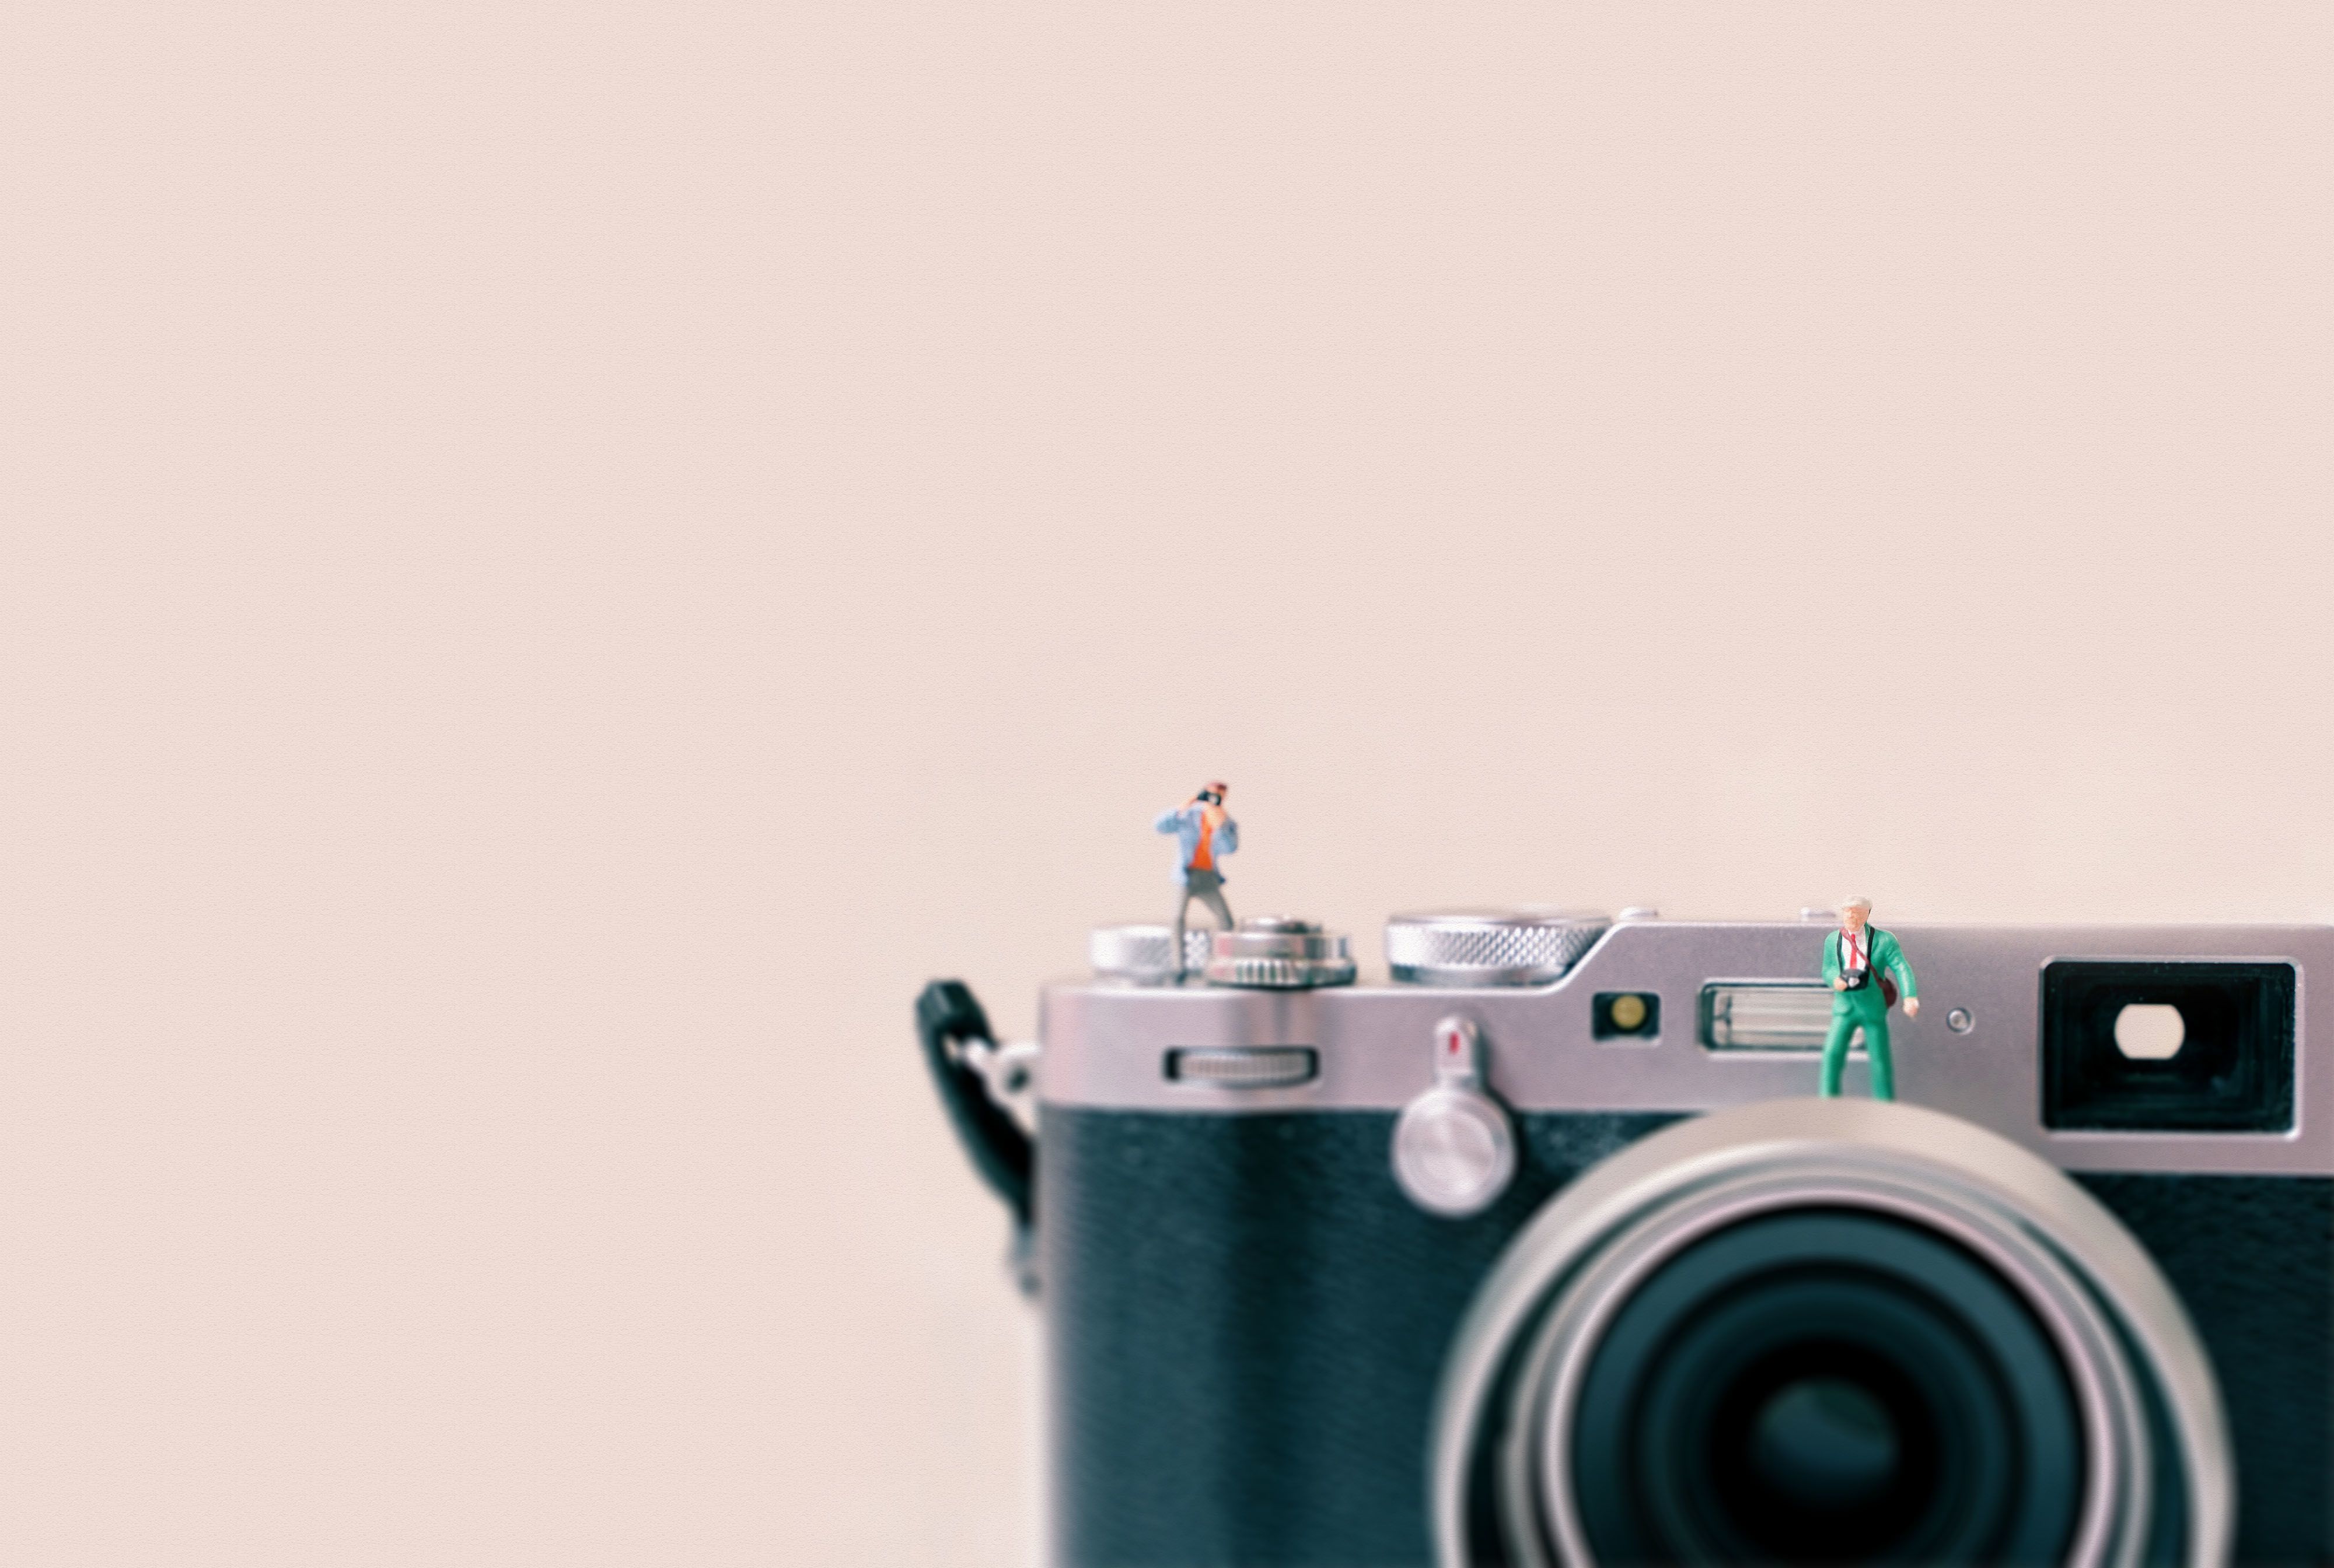 A film camera with tiny model people standing on top of it. The camera is set against a pastel pink background.